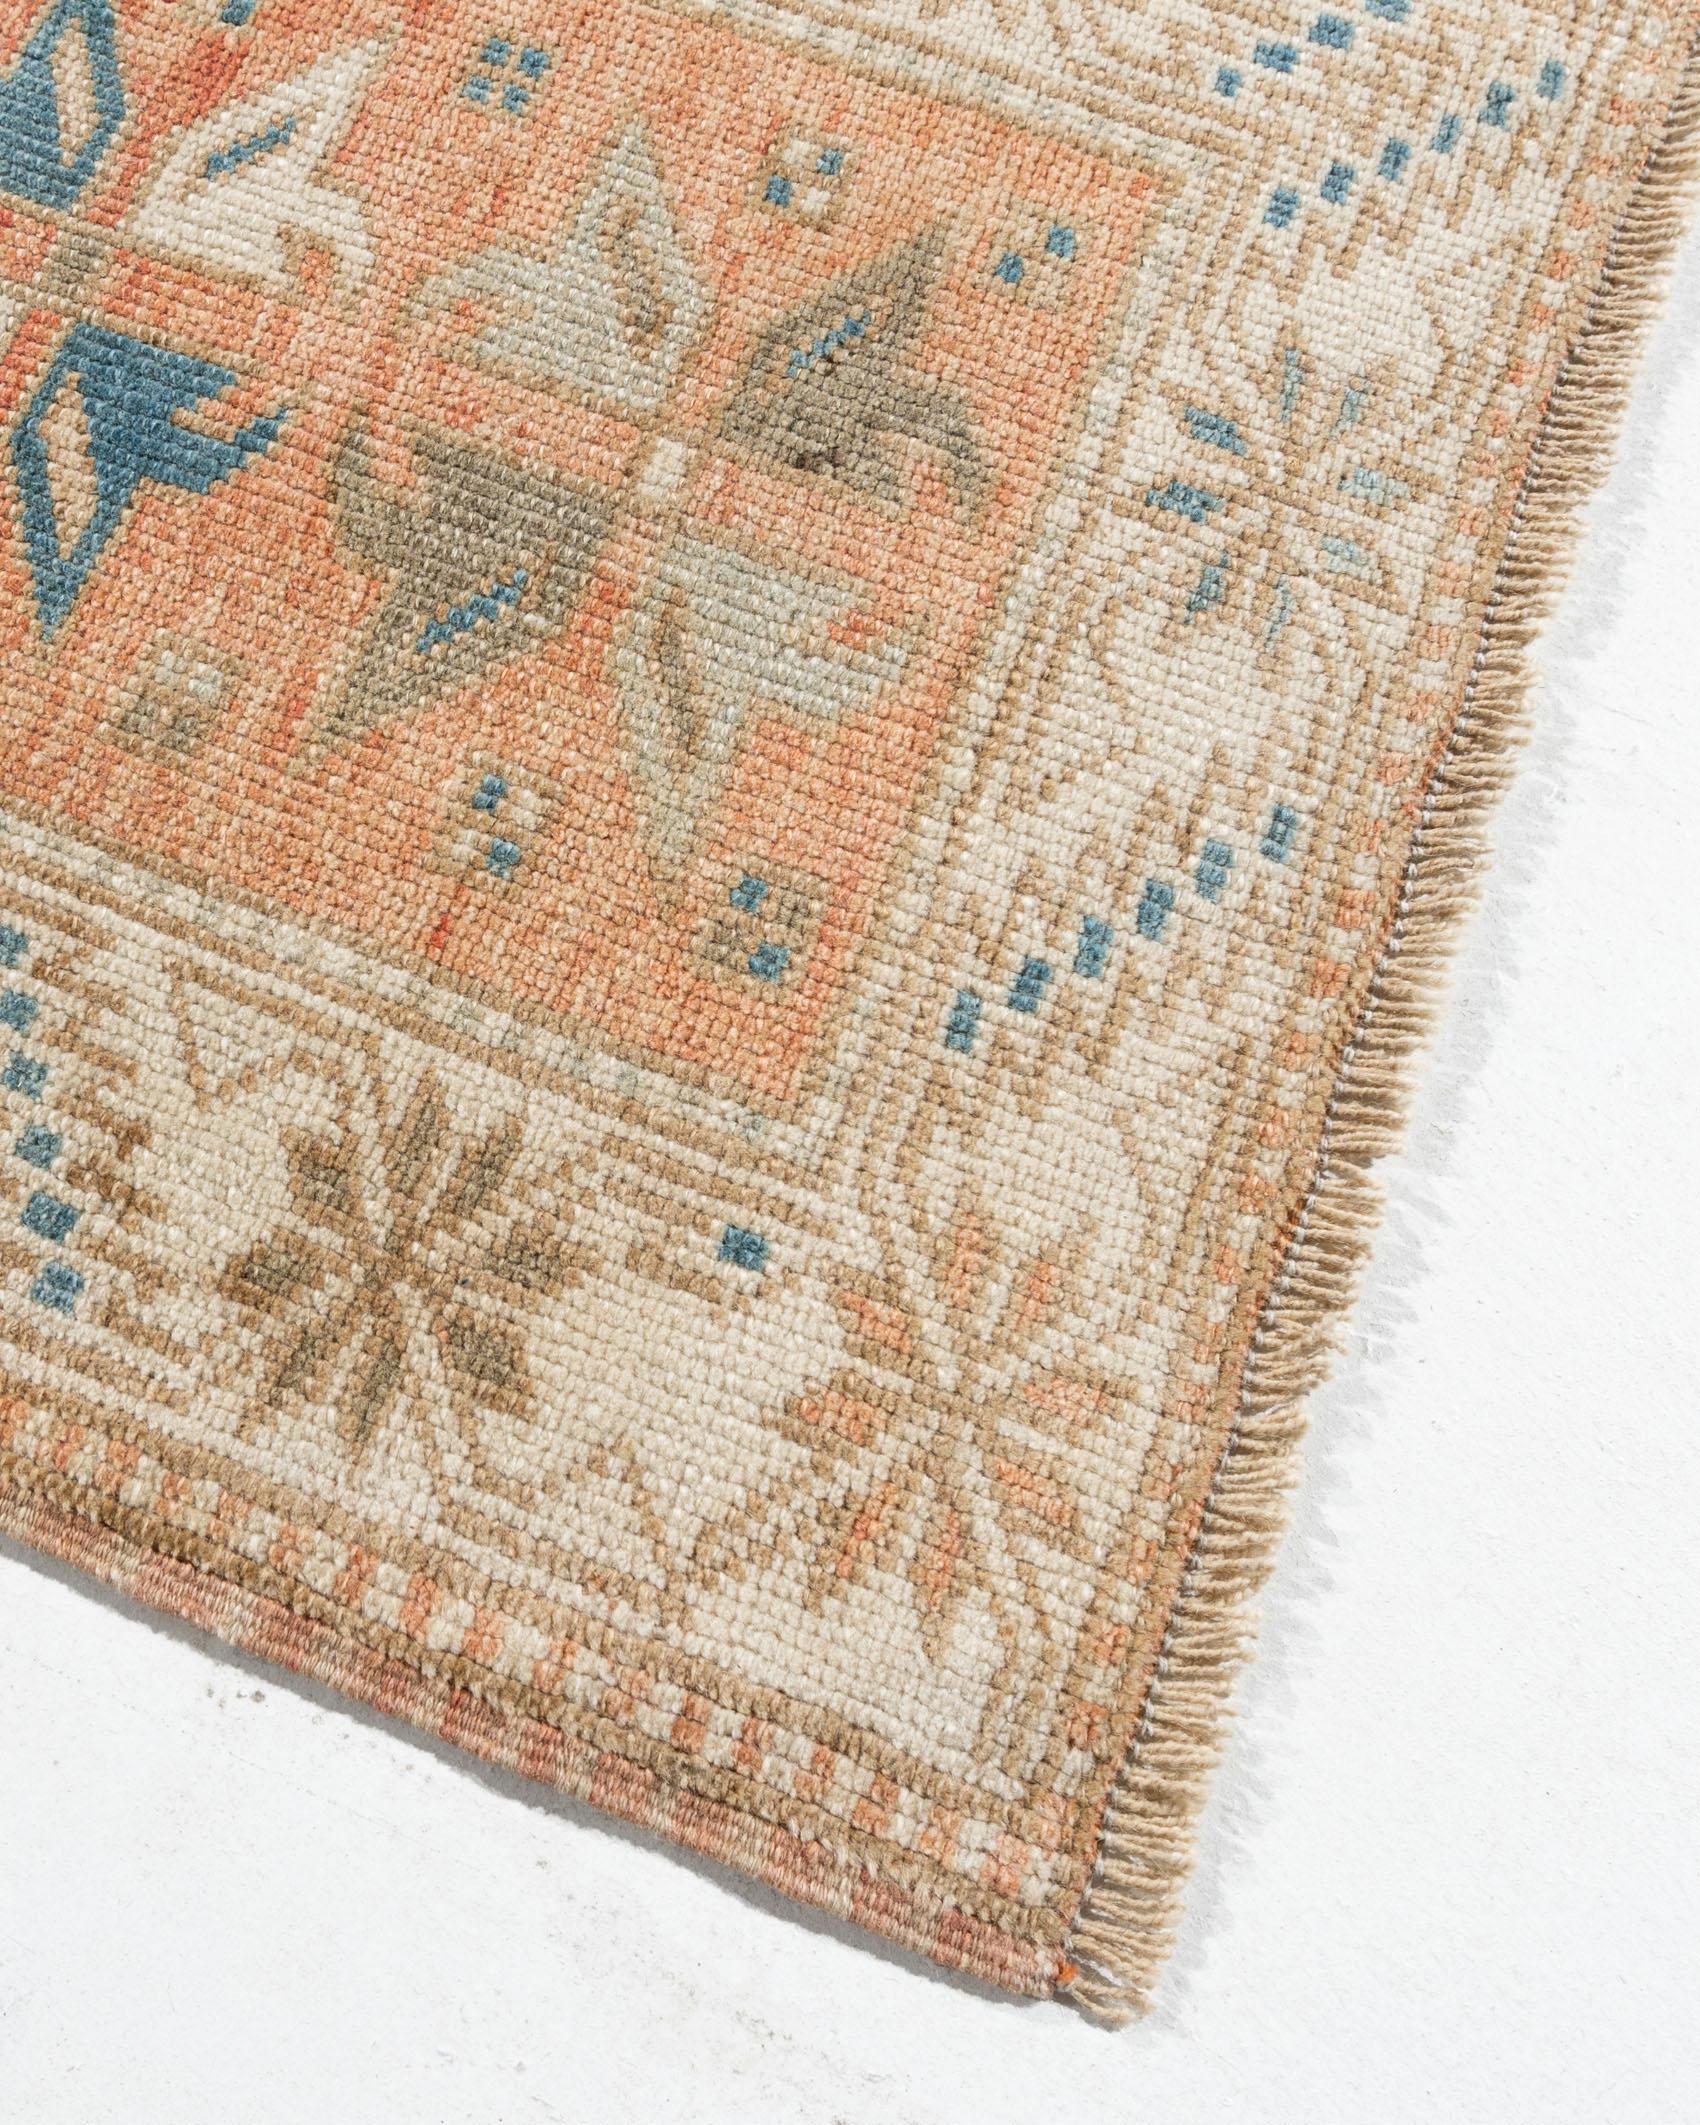 Vintage Turkish Oushak Runner 1'10 x 6'8. Originating in the city of Oushak in central western Anatolia, Turkish Oushak rugs display a mesmerizing Persian influence, making them one of the most popular types of antique rugs. Oushak (or Ushak) rugs